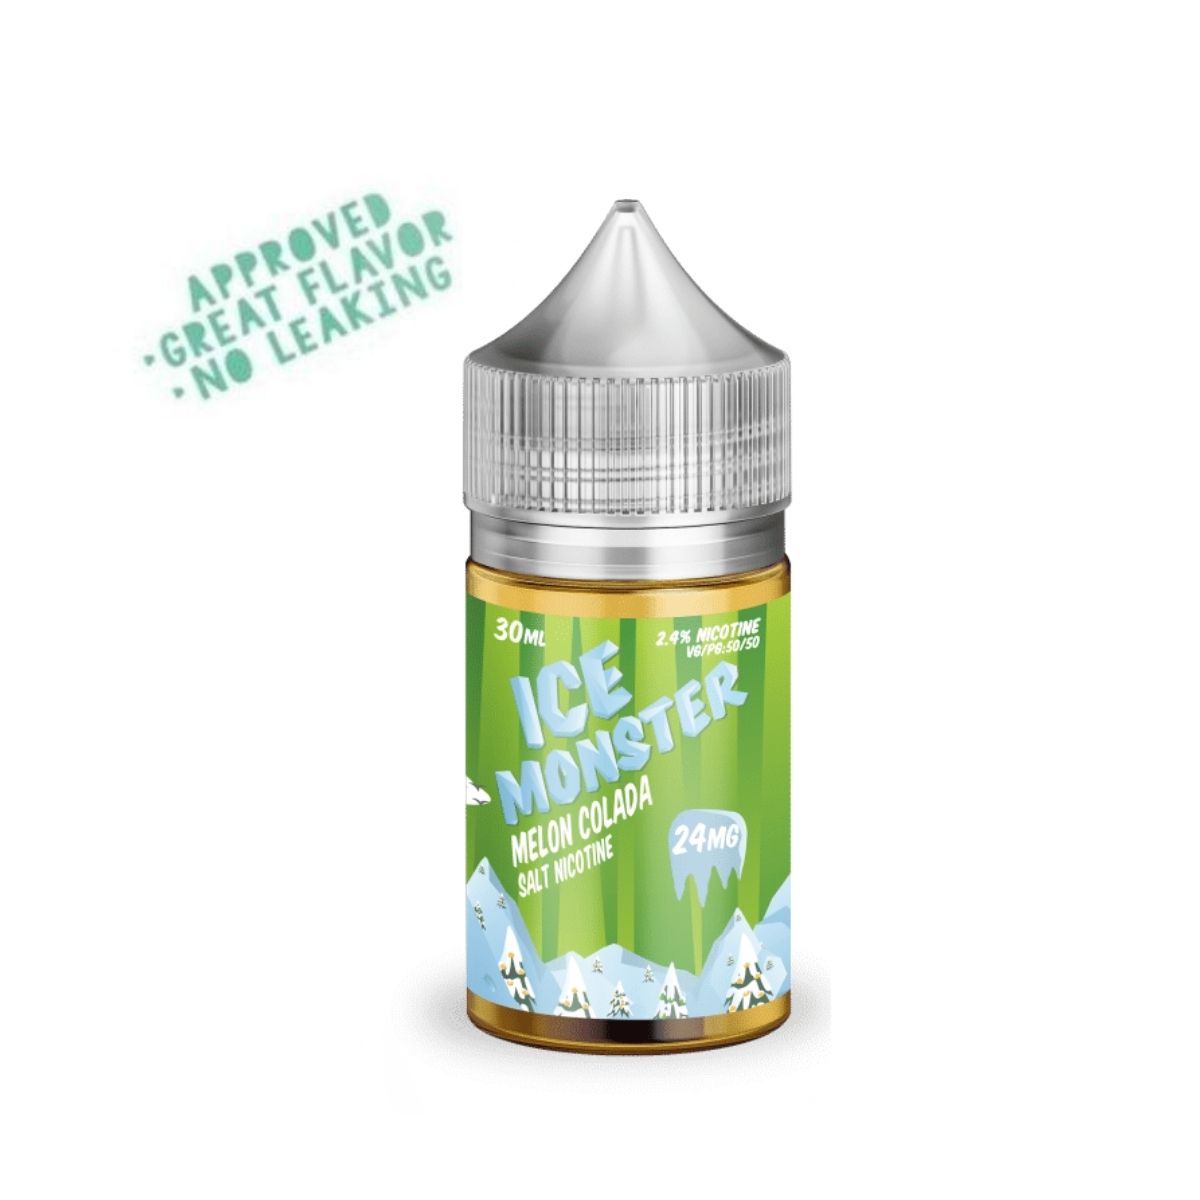 Melon Colada by Ice Monster - BLANKZ! Pods